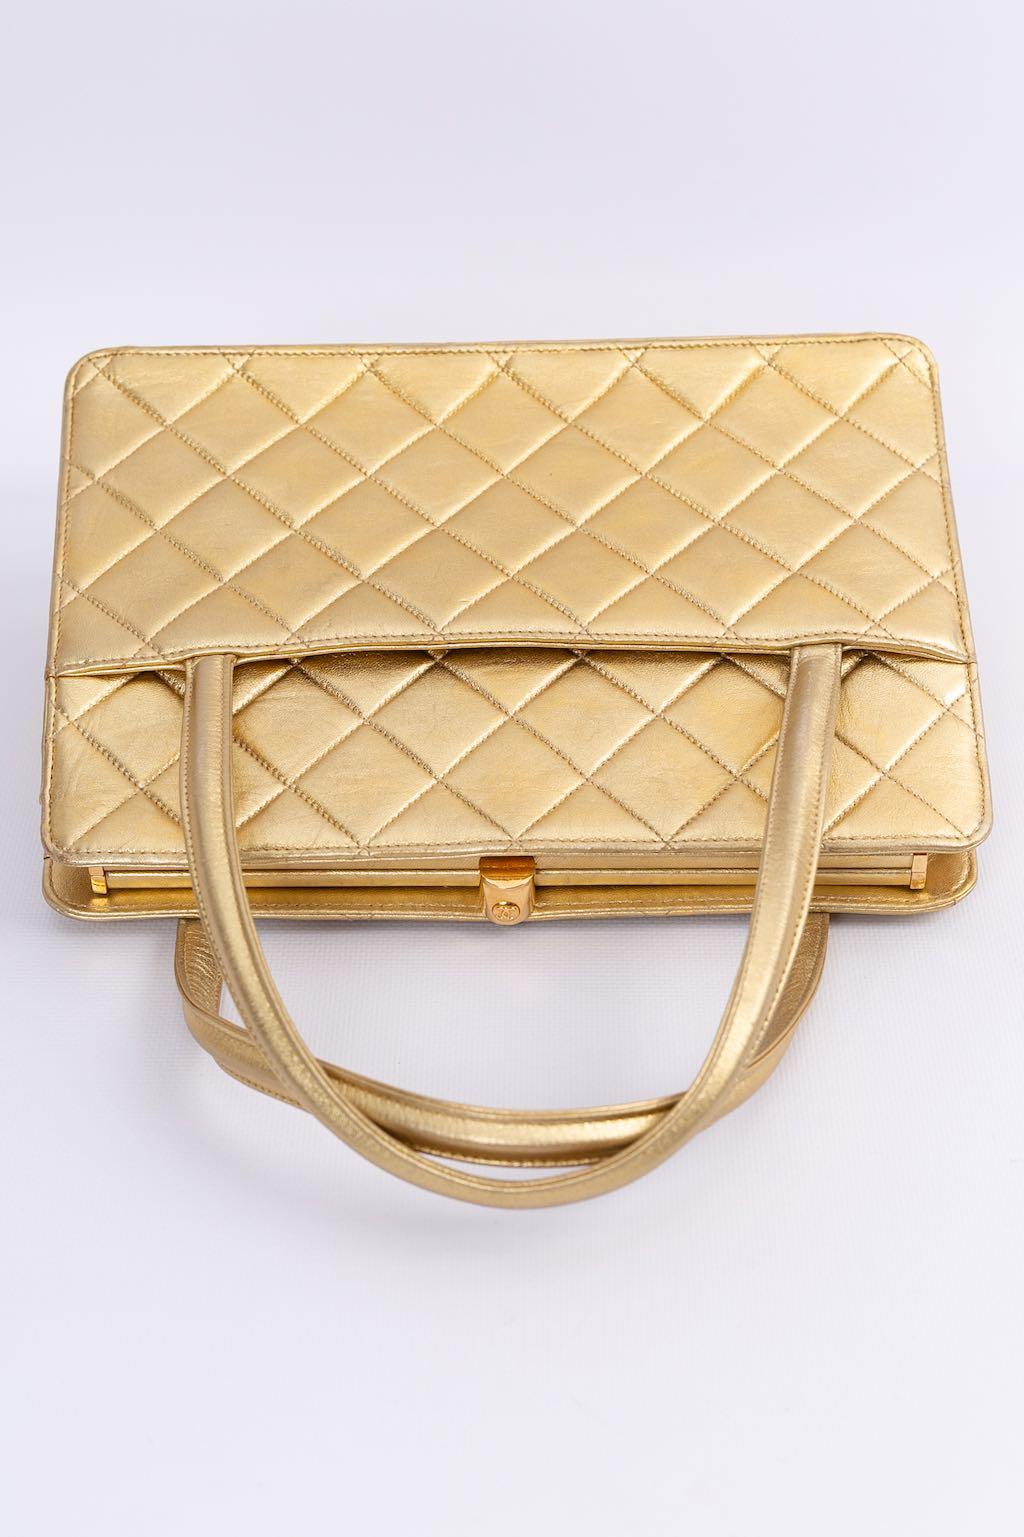 Chanel Evening Bag in Gold Leather For Sale 3